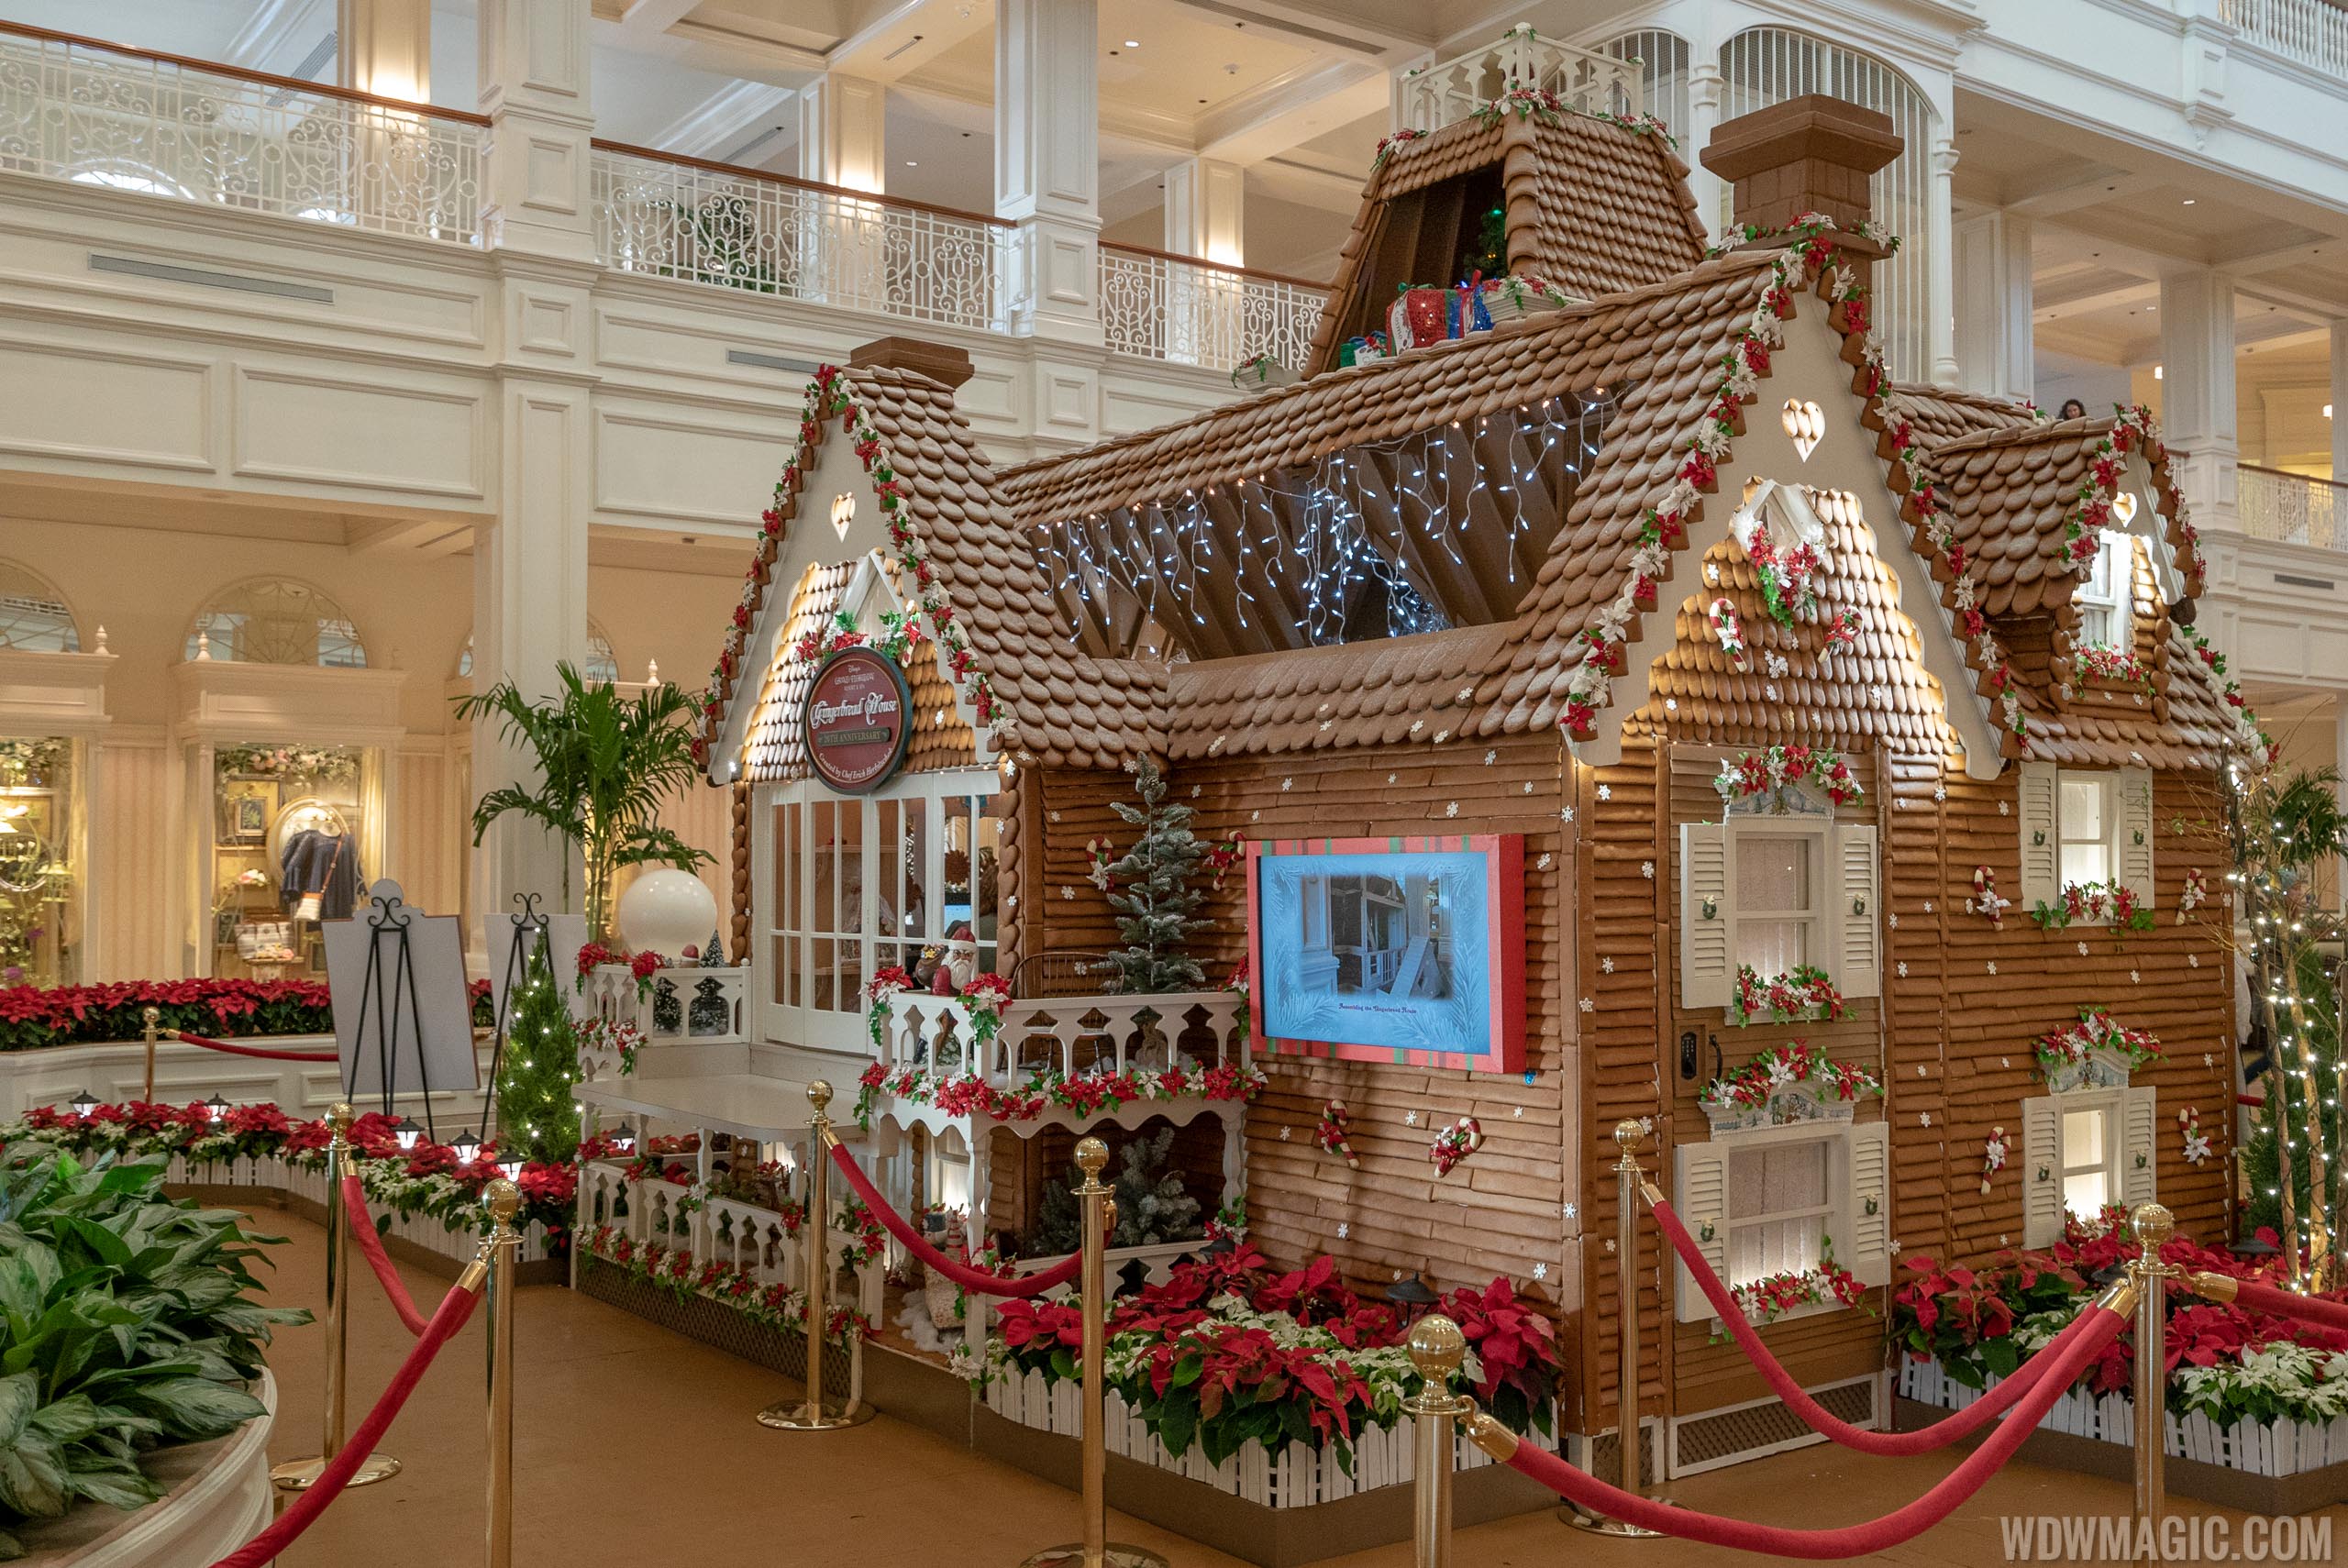 2018 Grand Floridian Gingerbread House Photo 6 of 6